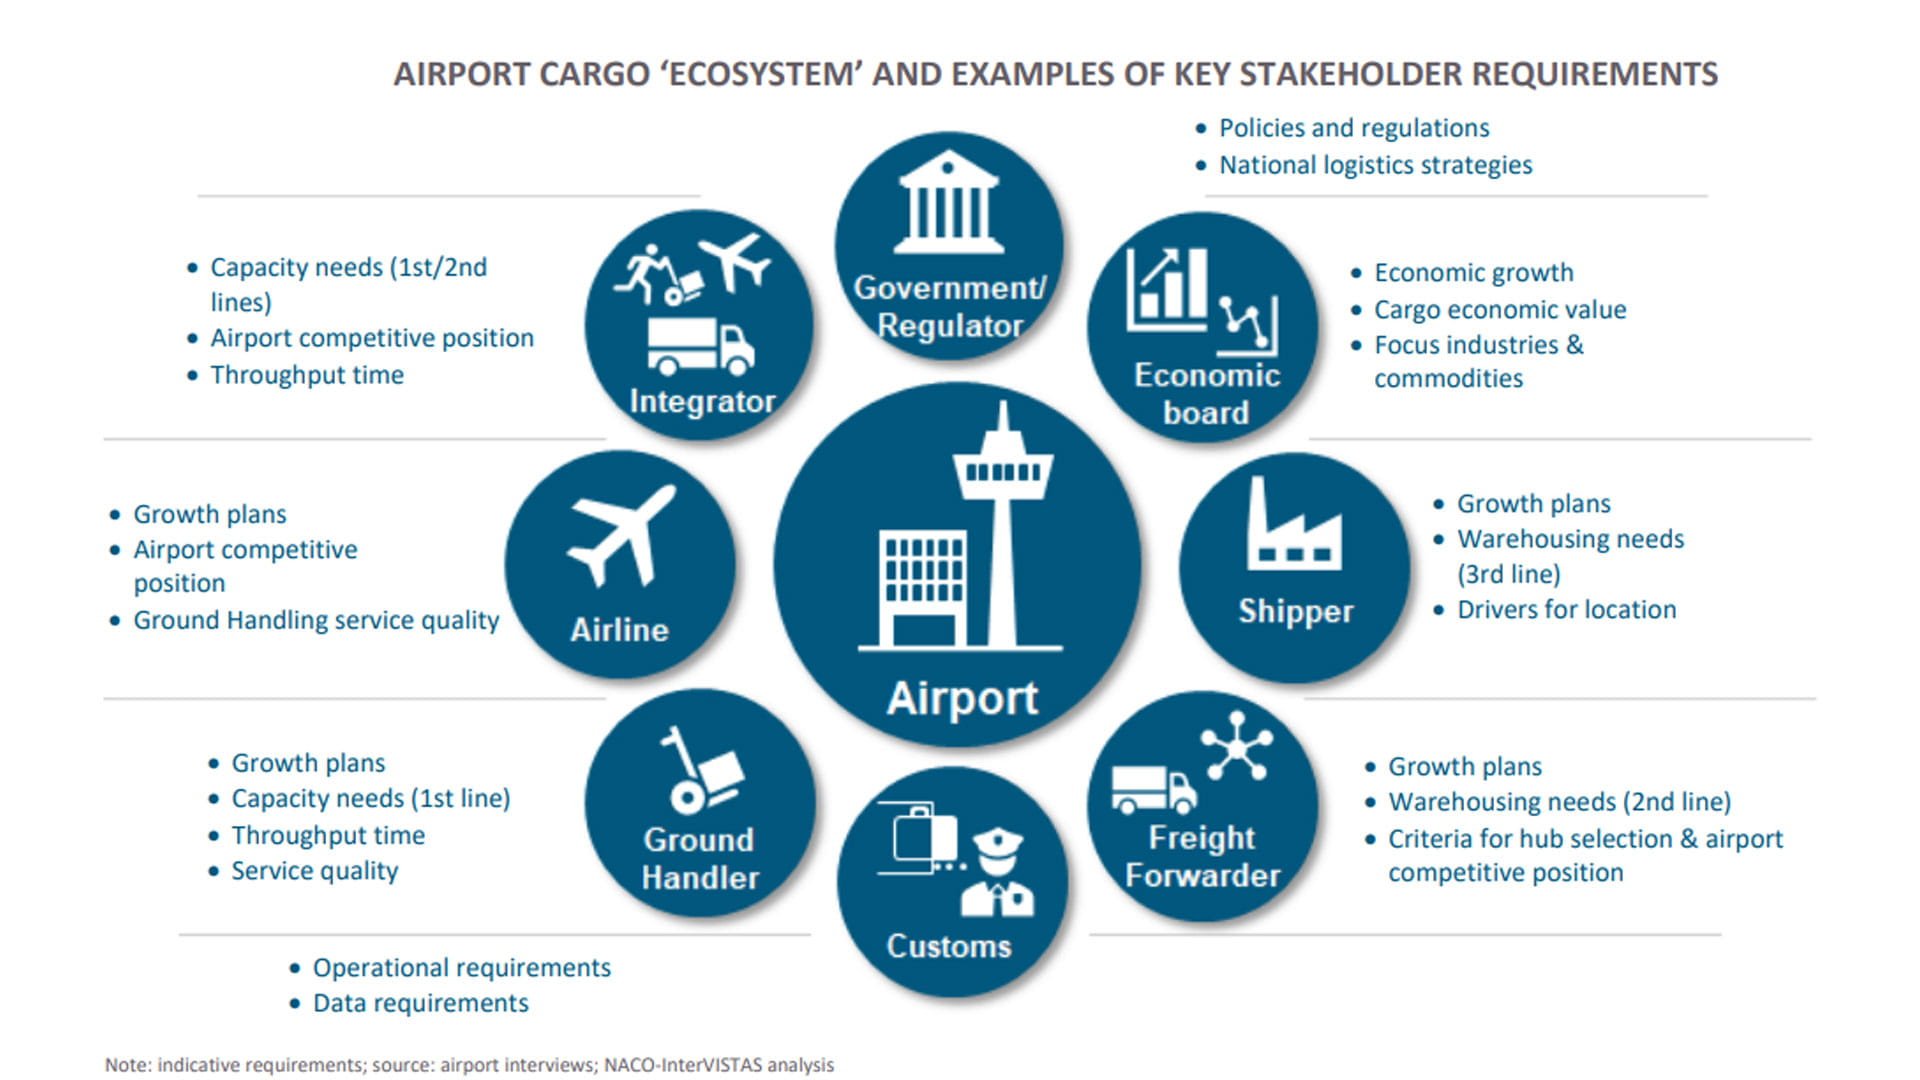 Four ways to diversify airport revenue and build business resilience